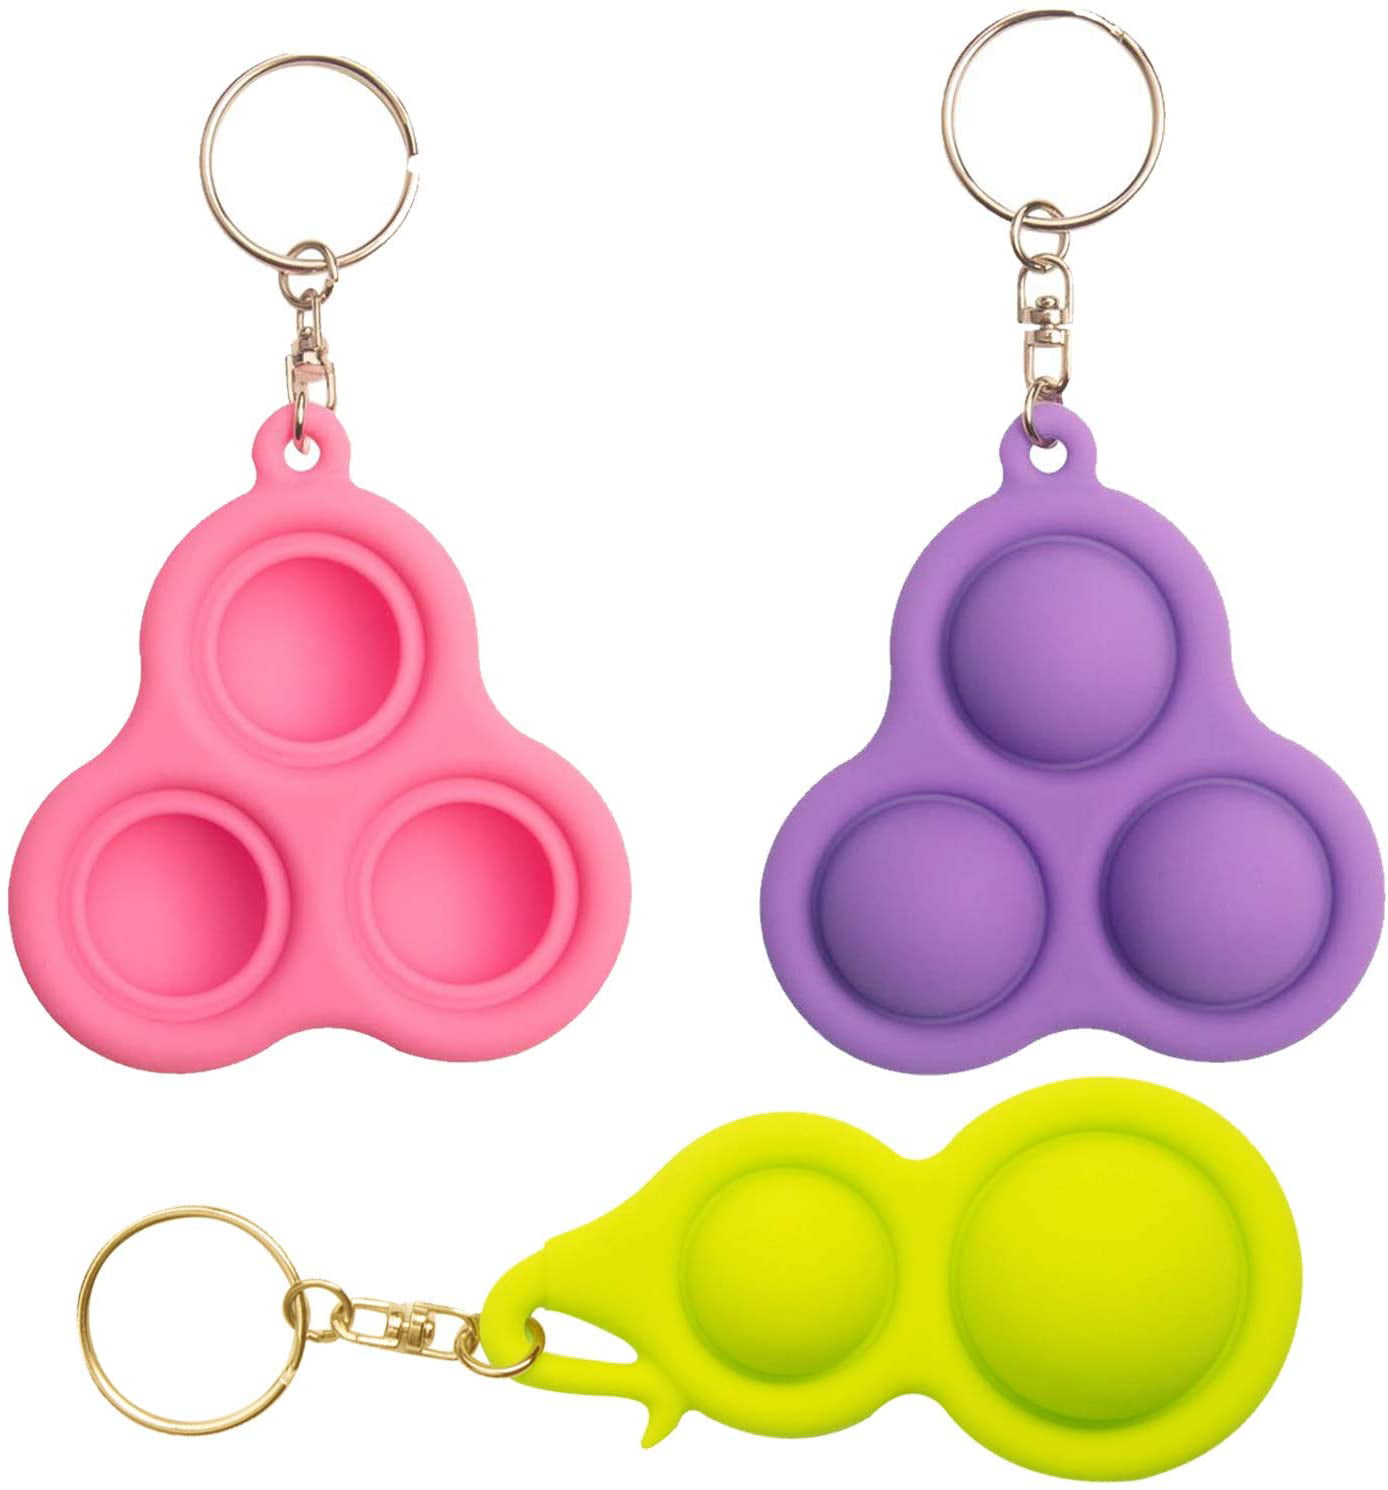 Details about   4PC Fidget Simple Dimple Toy Keychain Autism Needs Squishy Stress Reliever Toys 